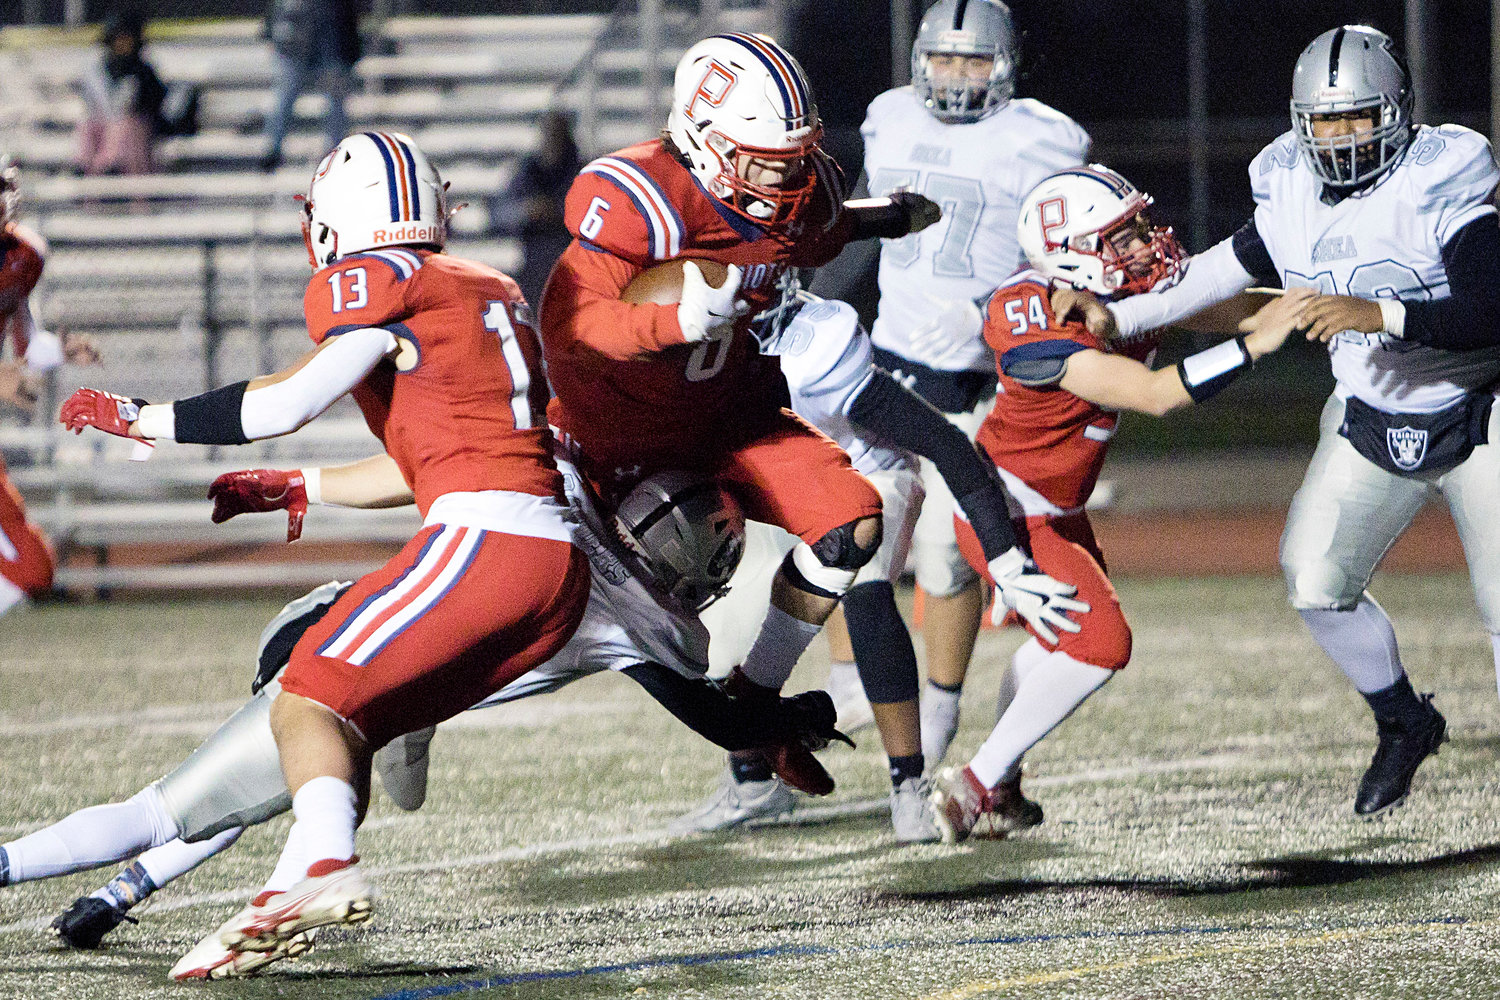 Marcus Evans leaps through the Shea defense to gain yardage for the Patriots during Friday's opening-round D-I playoff game won easily by Portsmouth, 48-14.